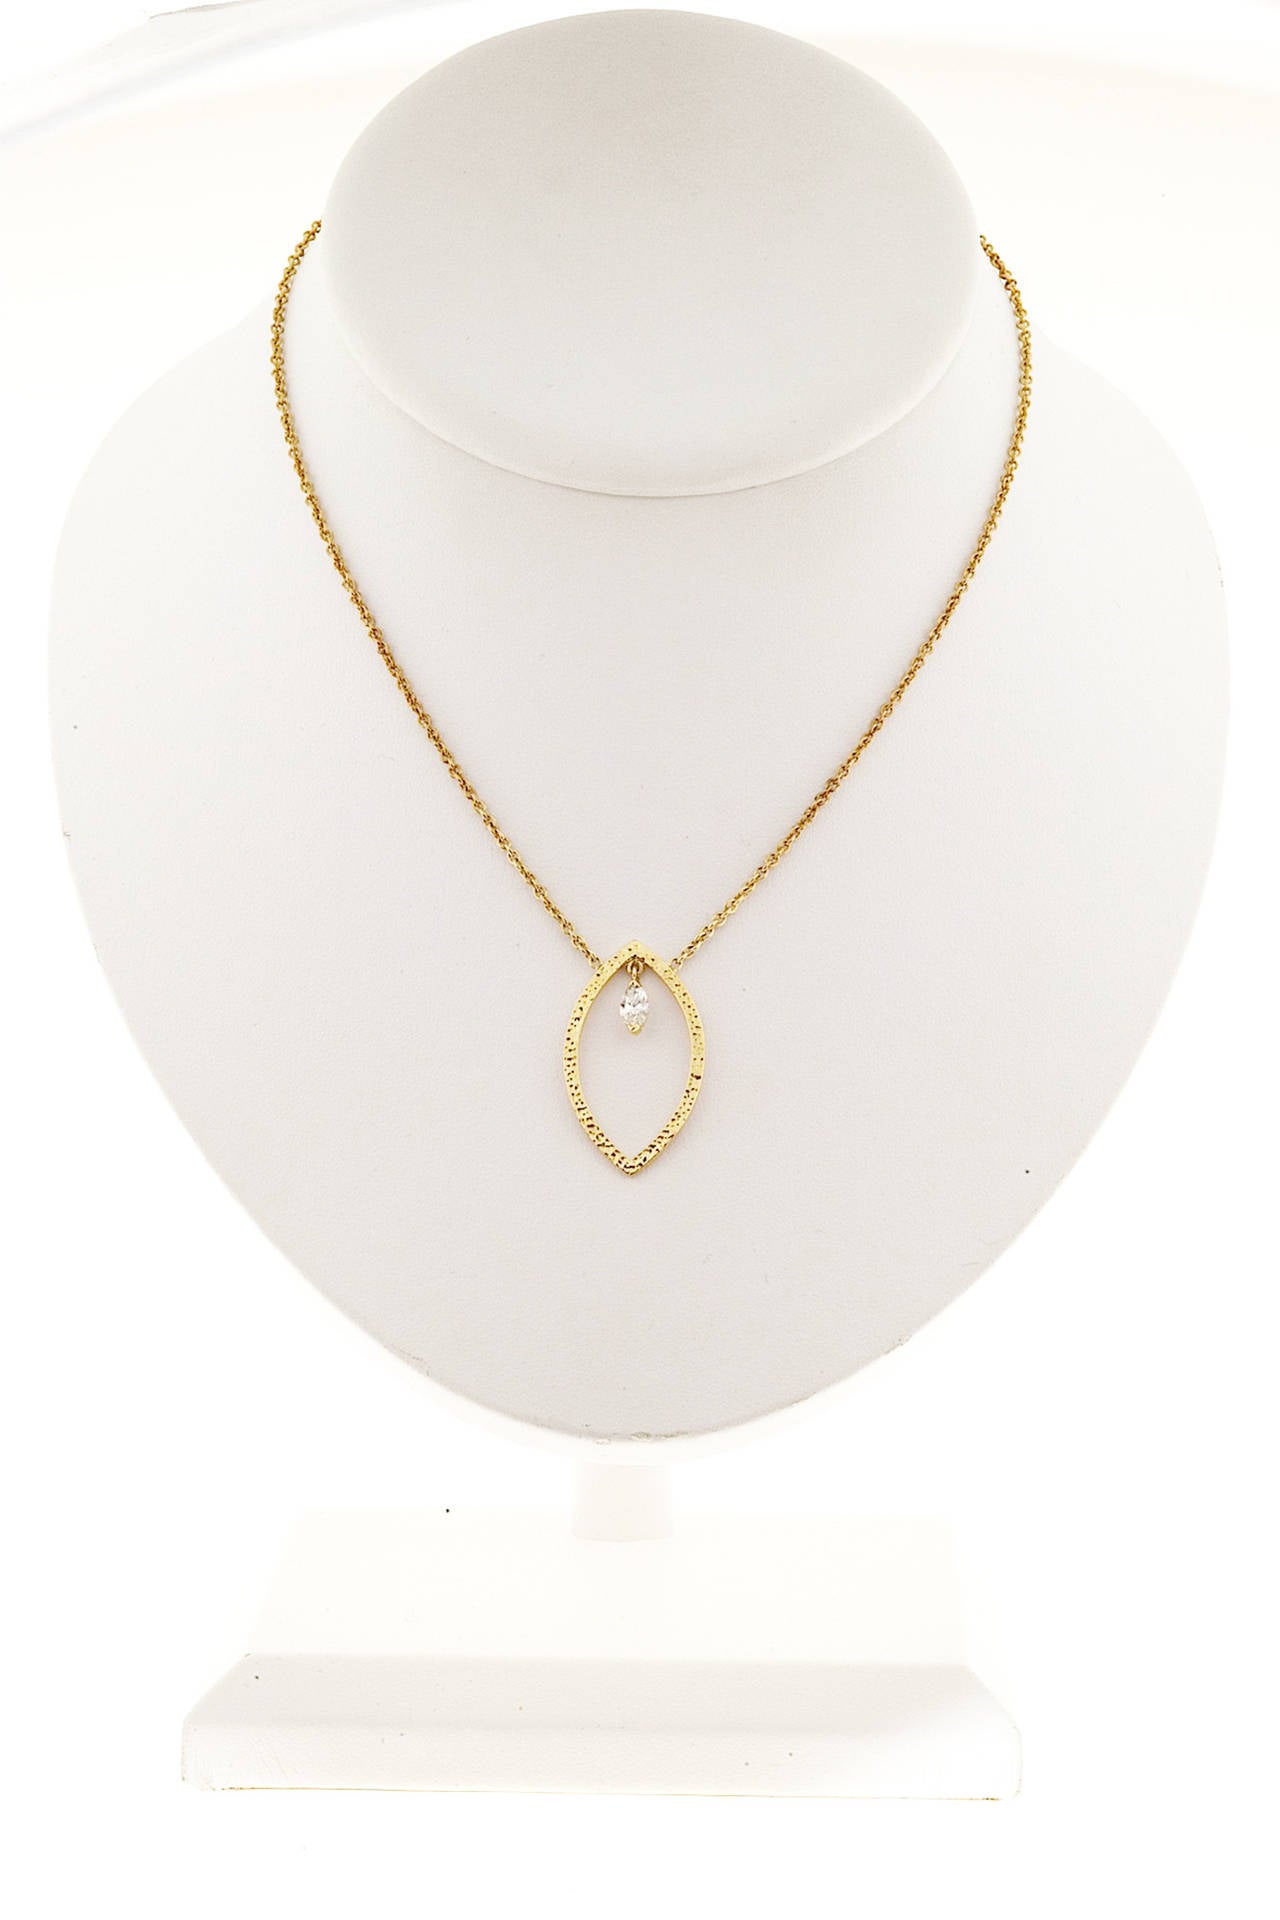 Designer Jade Trau 18k yellow gold open Marquise pendant with a Marquise diamond in the center.

1 Marquise diamond .27cts, H, VS2 to SI1
18k Yellow Gold
Stamped: 750 Jade Trau
8.4 grams
Chain stamped: 750 K18
Marquise center section: 1 1/4 x